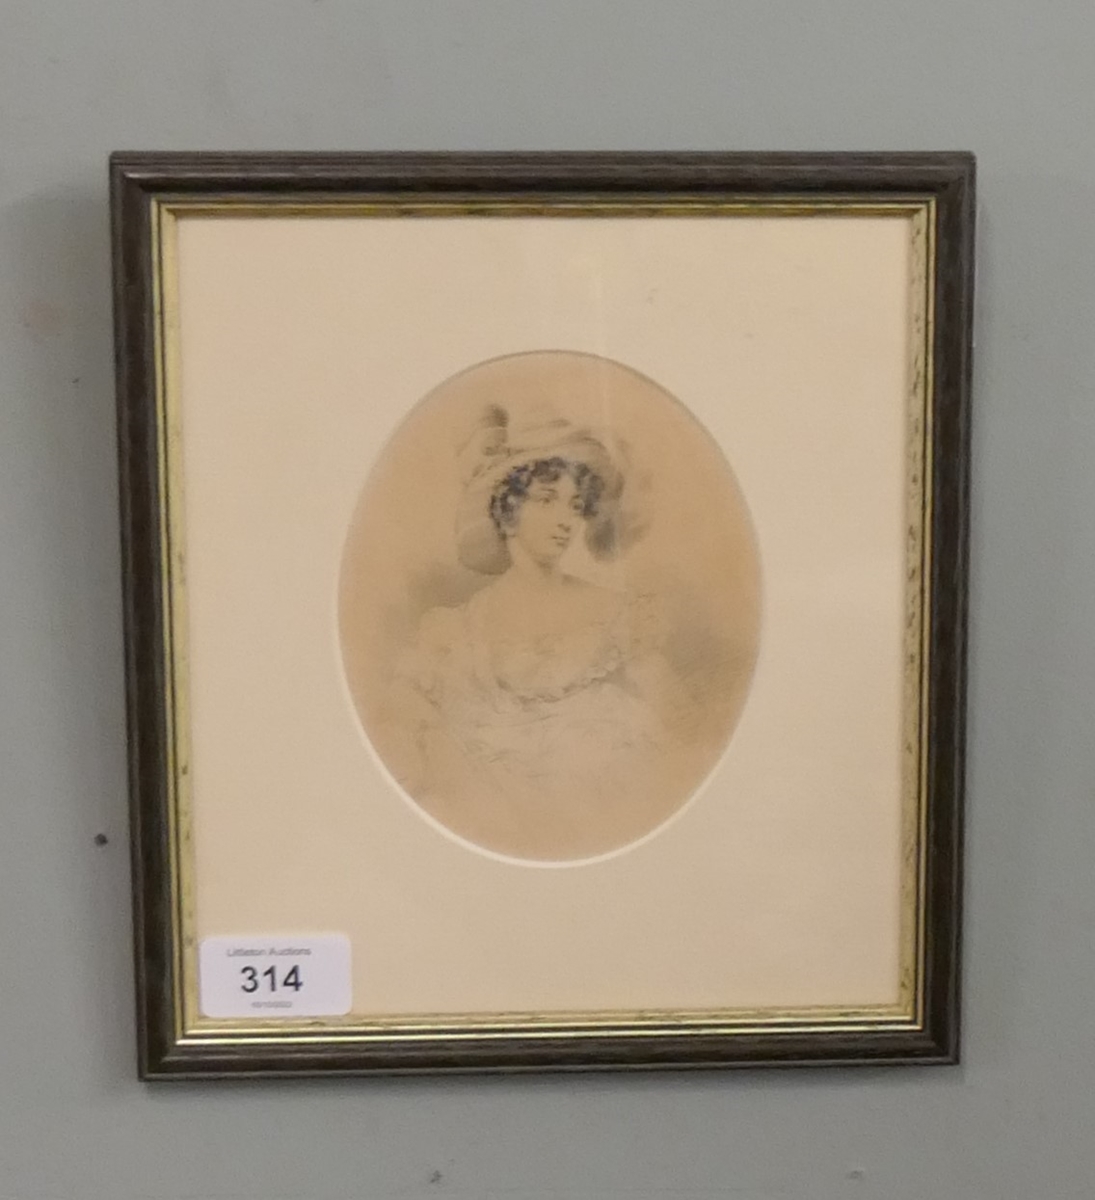 Pencil portrait of a young lady by W Collins - 19thC